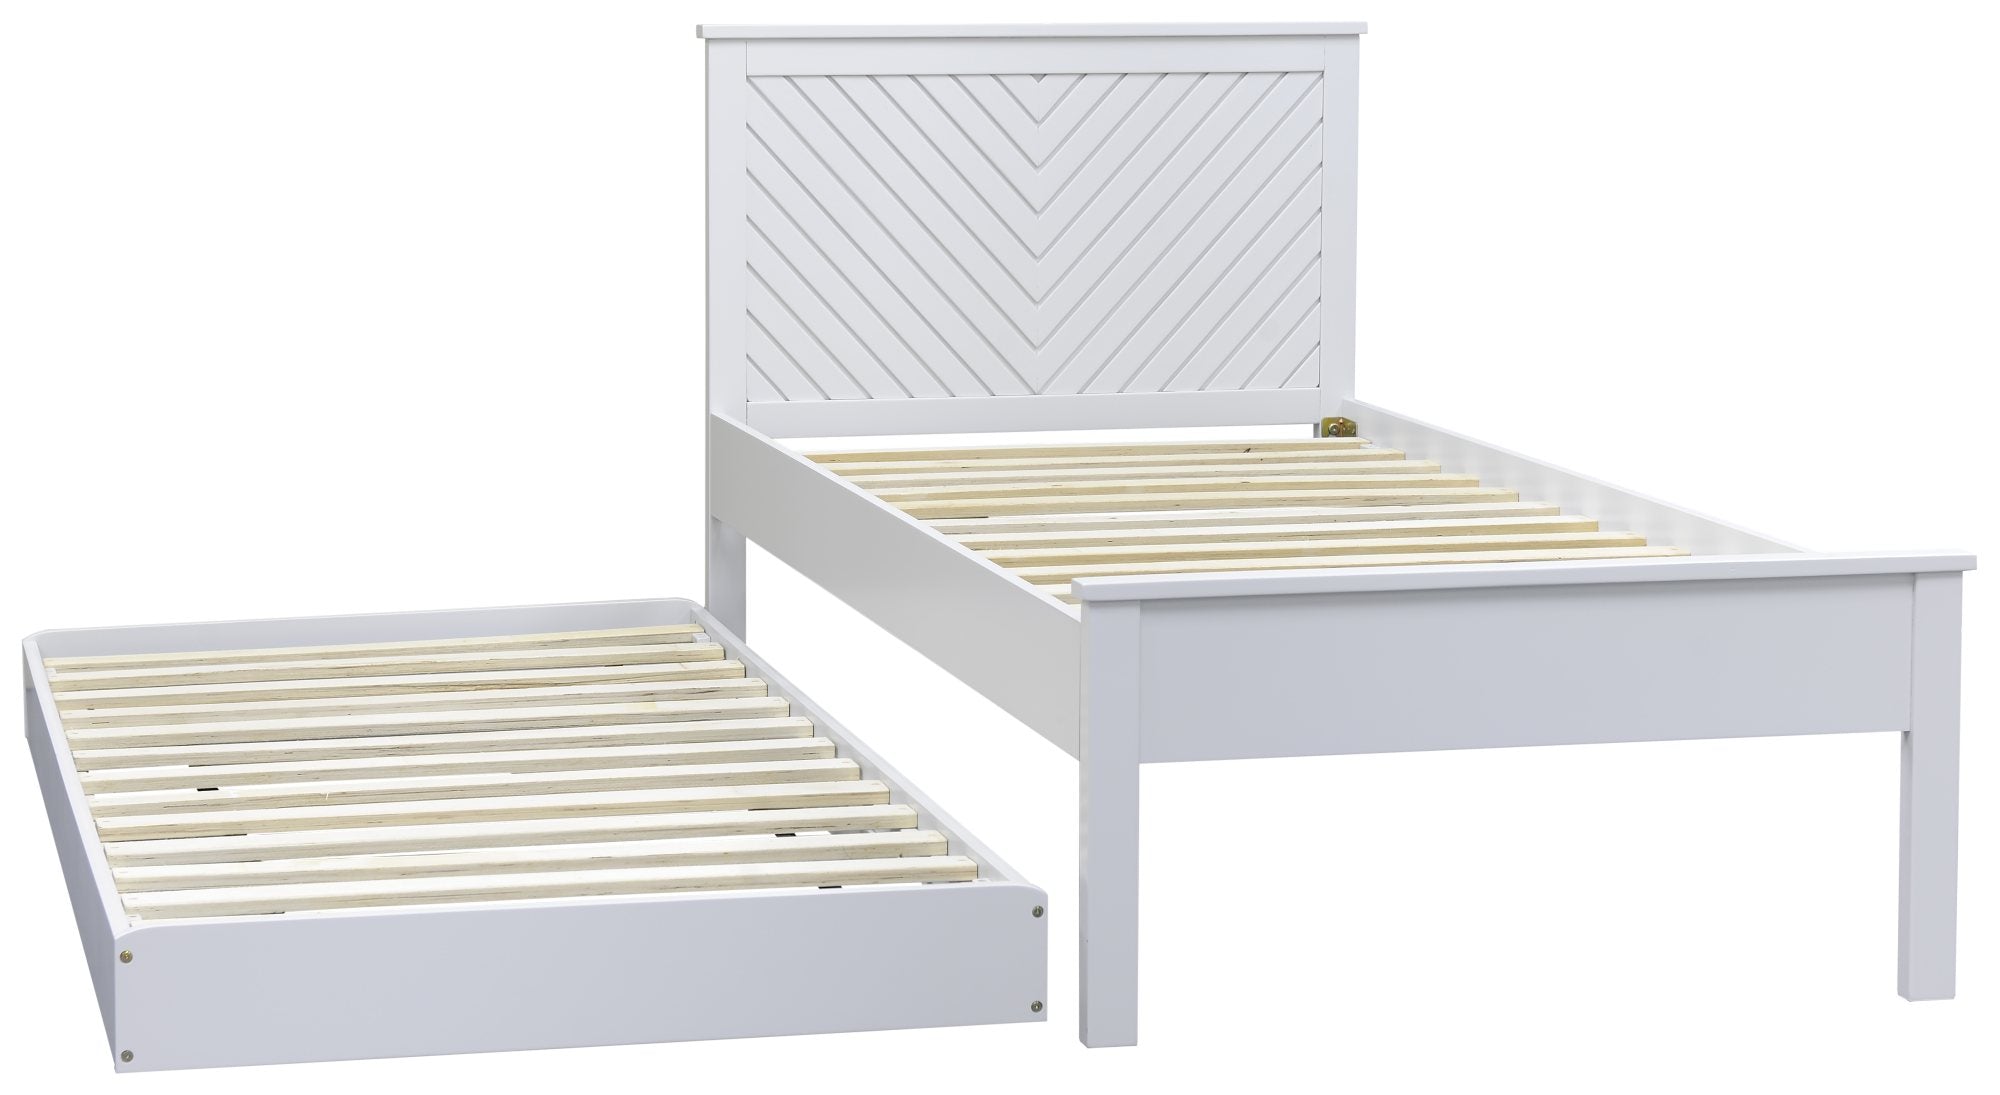 Chevron guest bed with guest bed in folded leg position